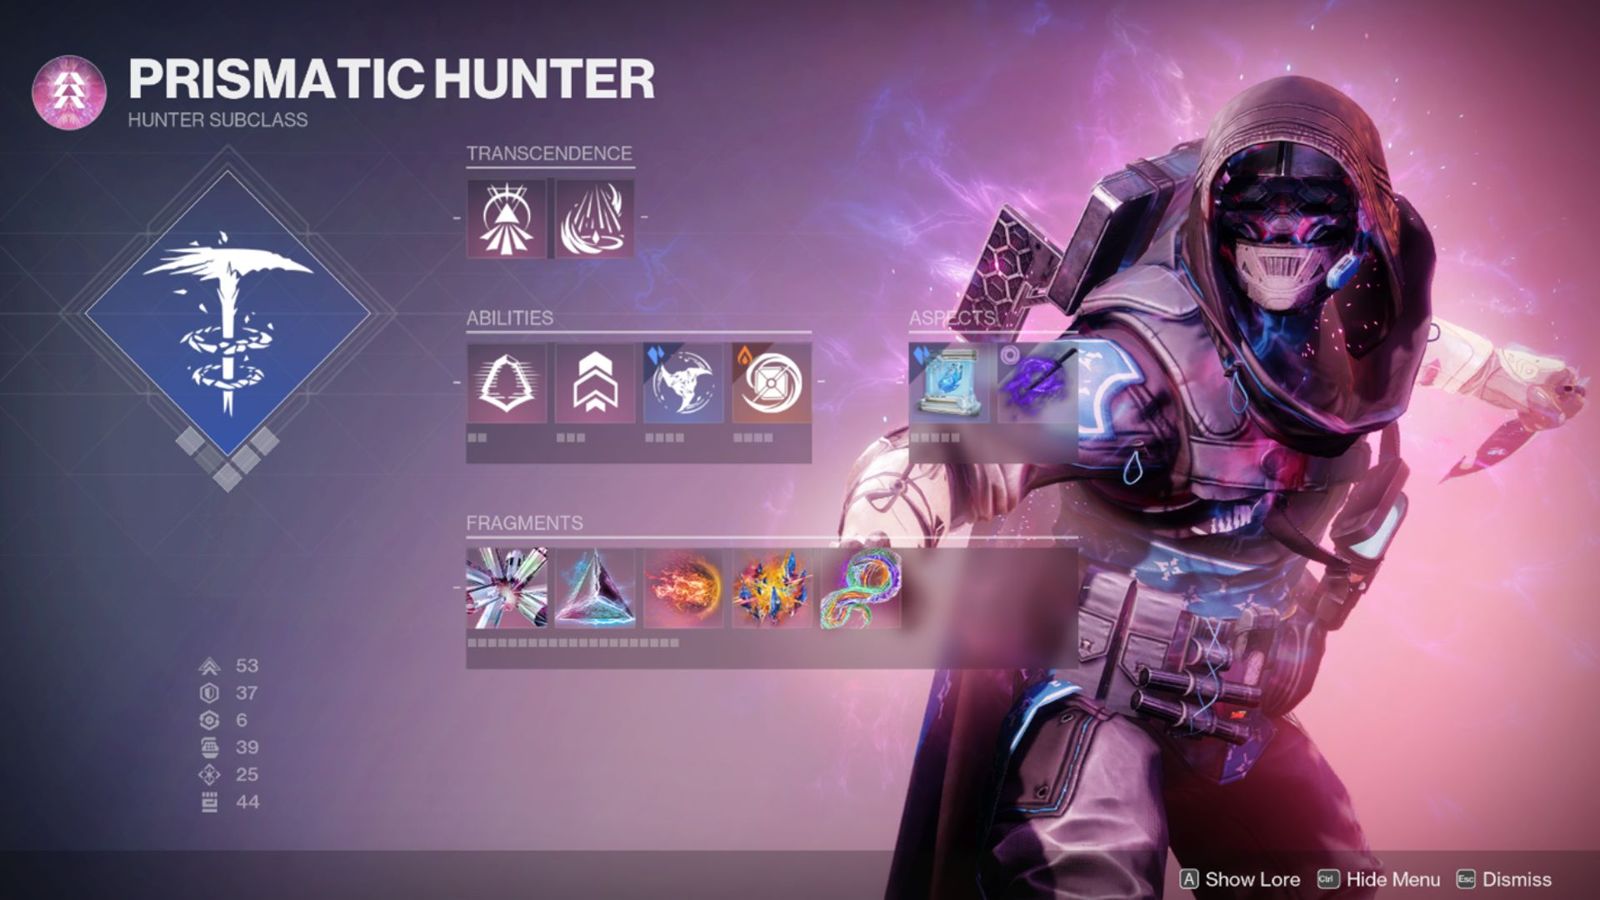 An image of the Prismatic Hunter subclass